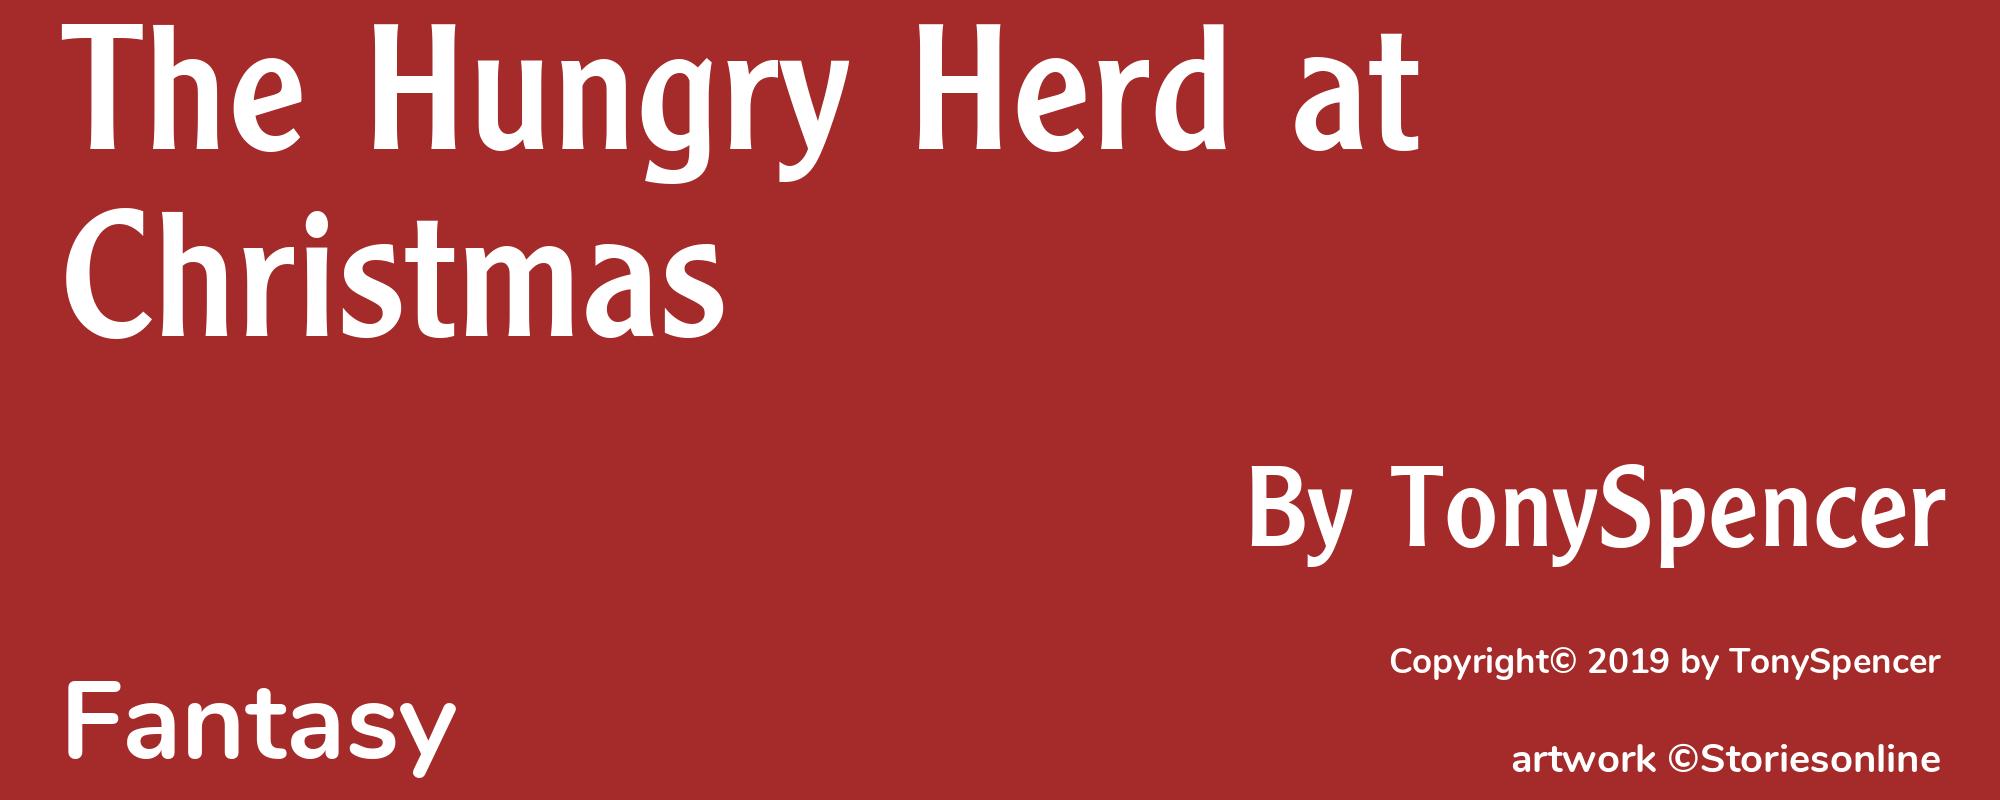 The Hungry Herd at Christmas - Cover